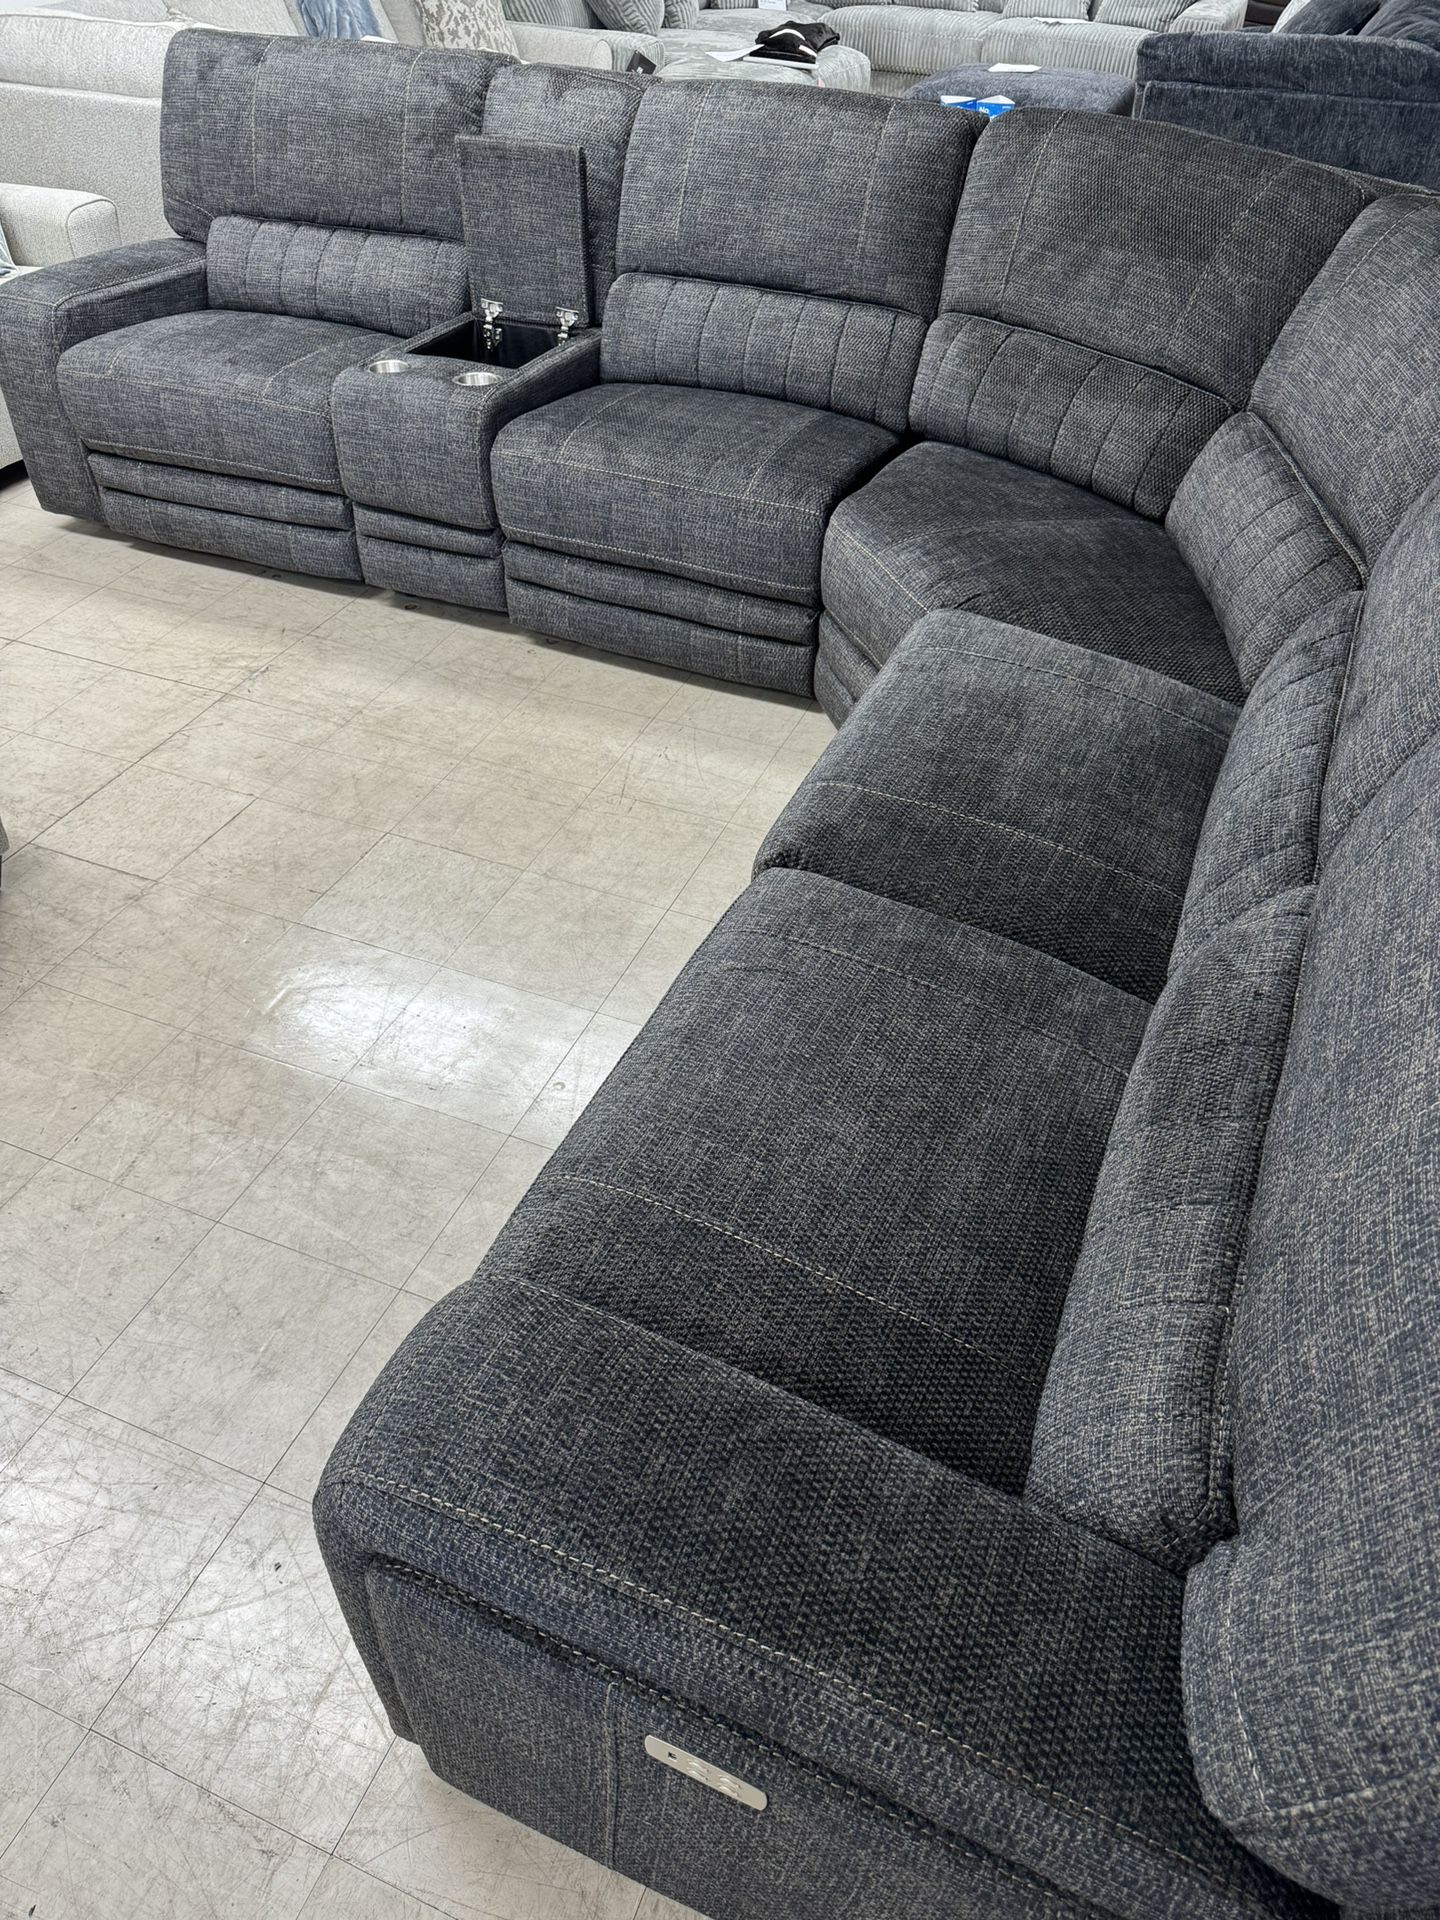 🔥Sofa Sectional three power, recliners, and power headrest